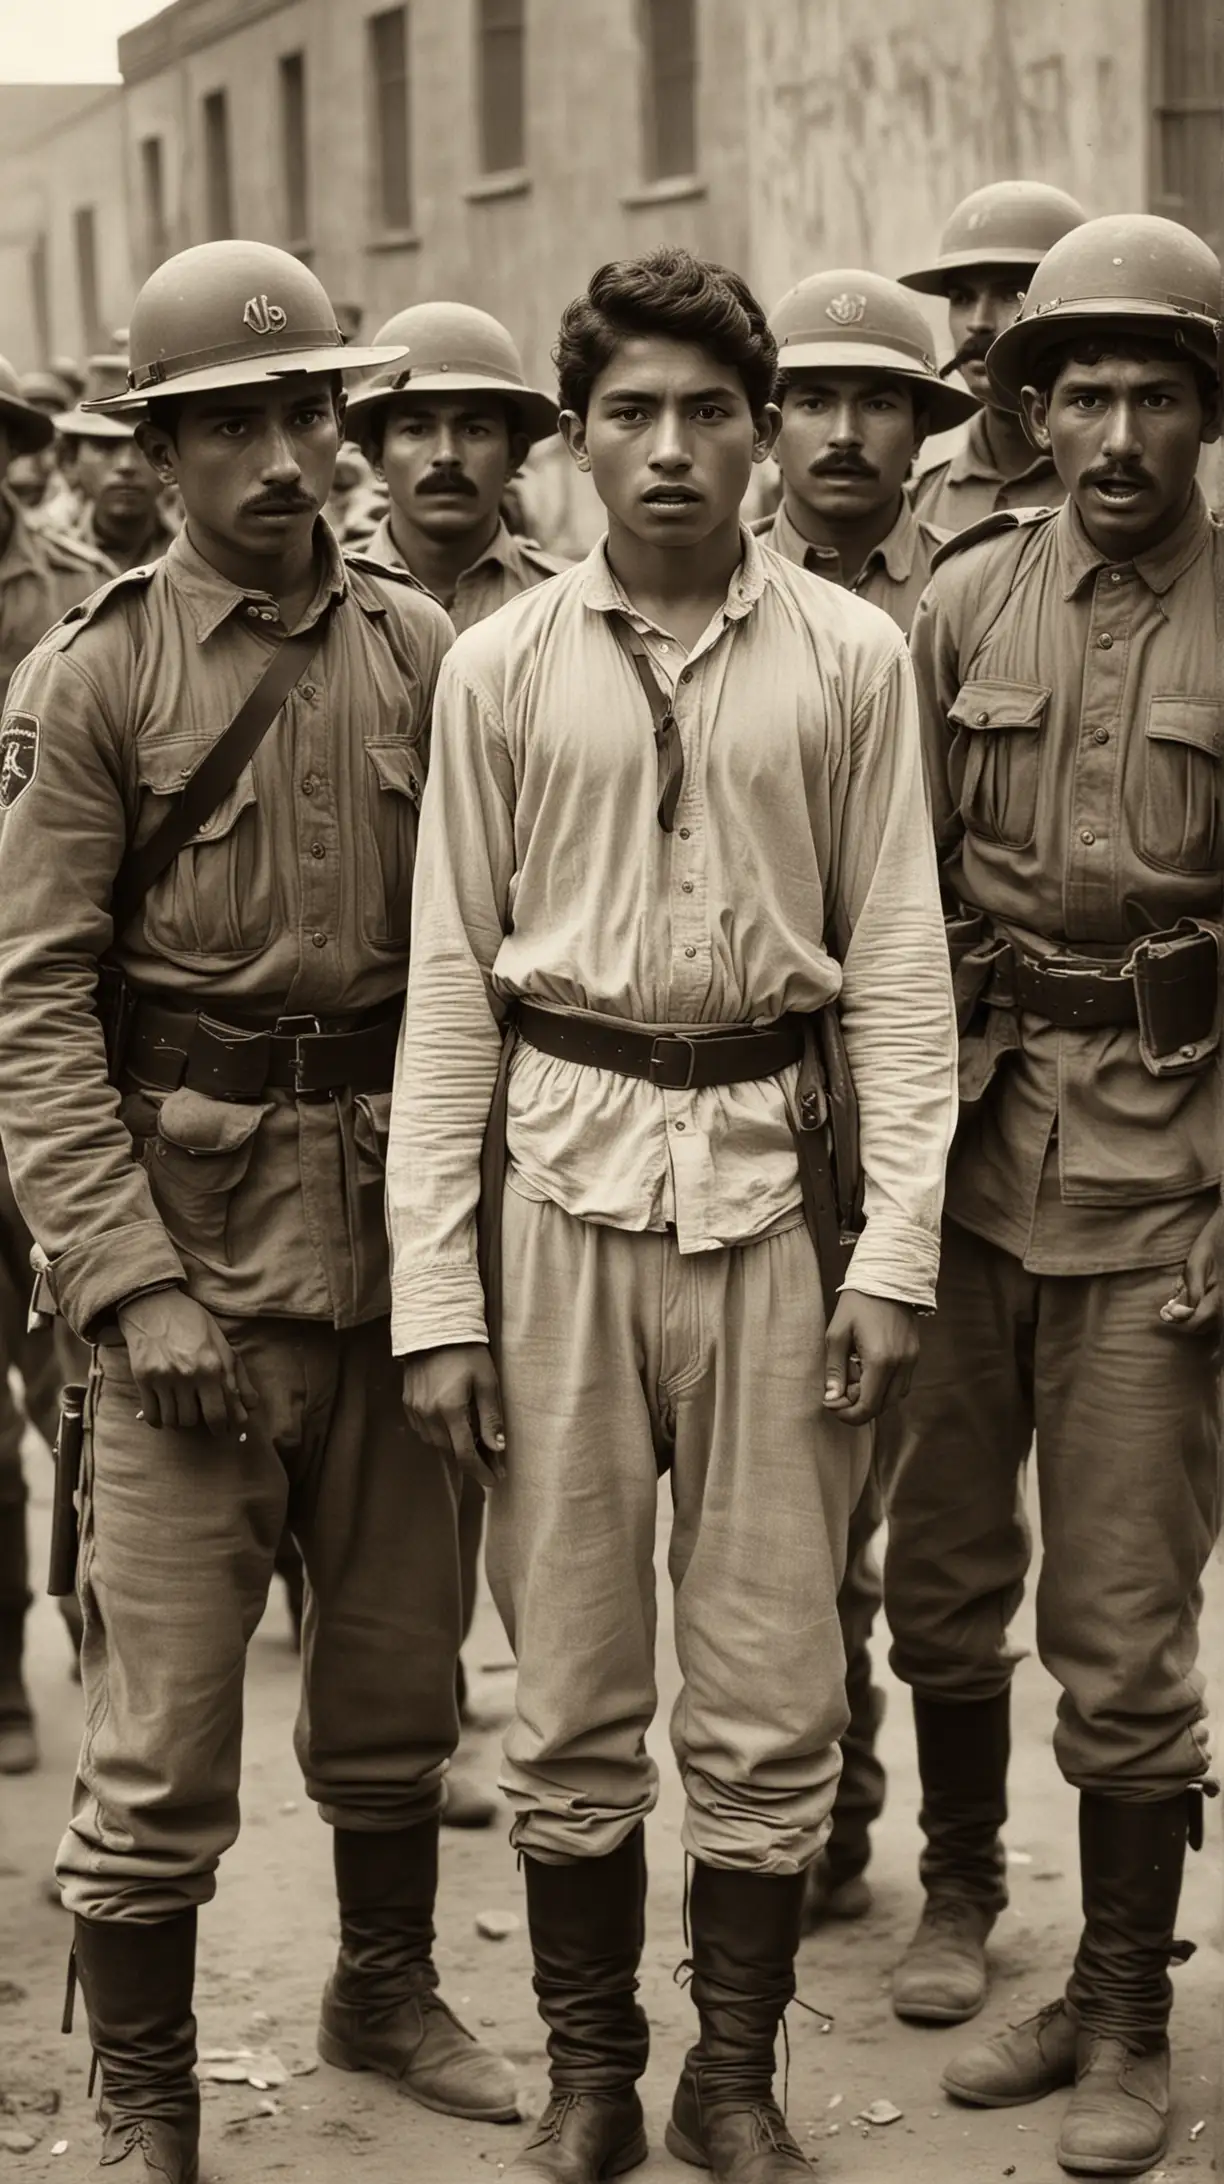 Create an image of a 20-year-old Mexican student, Veneslao Moguel, being arrested by soldiers during the Mexican Revolution in 1915. The scene should depict the tension and fear of the moment.